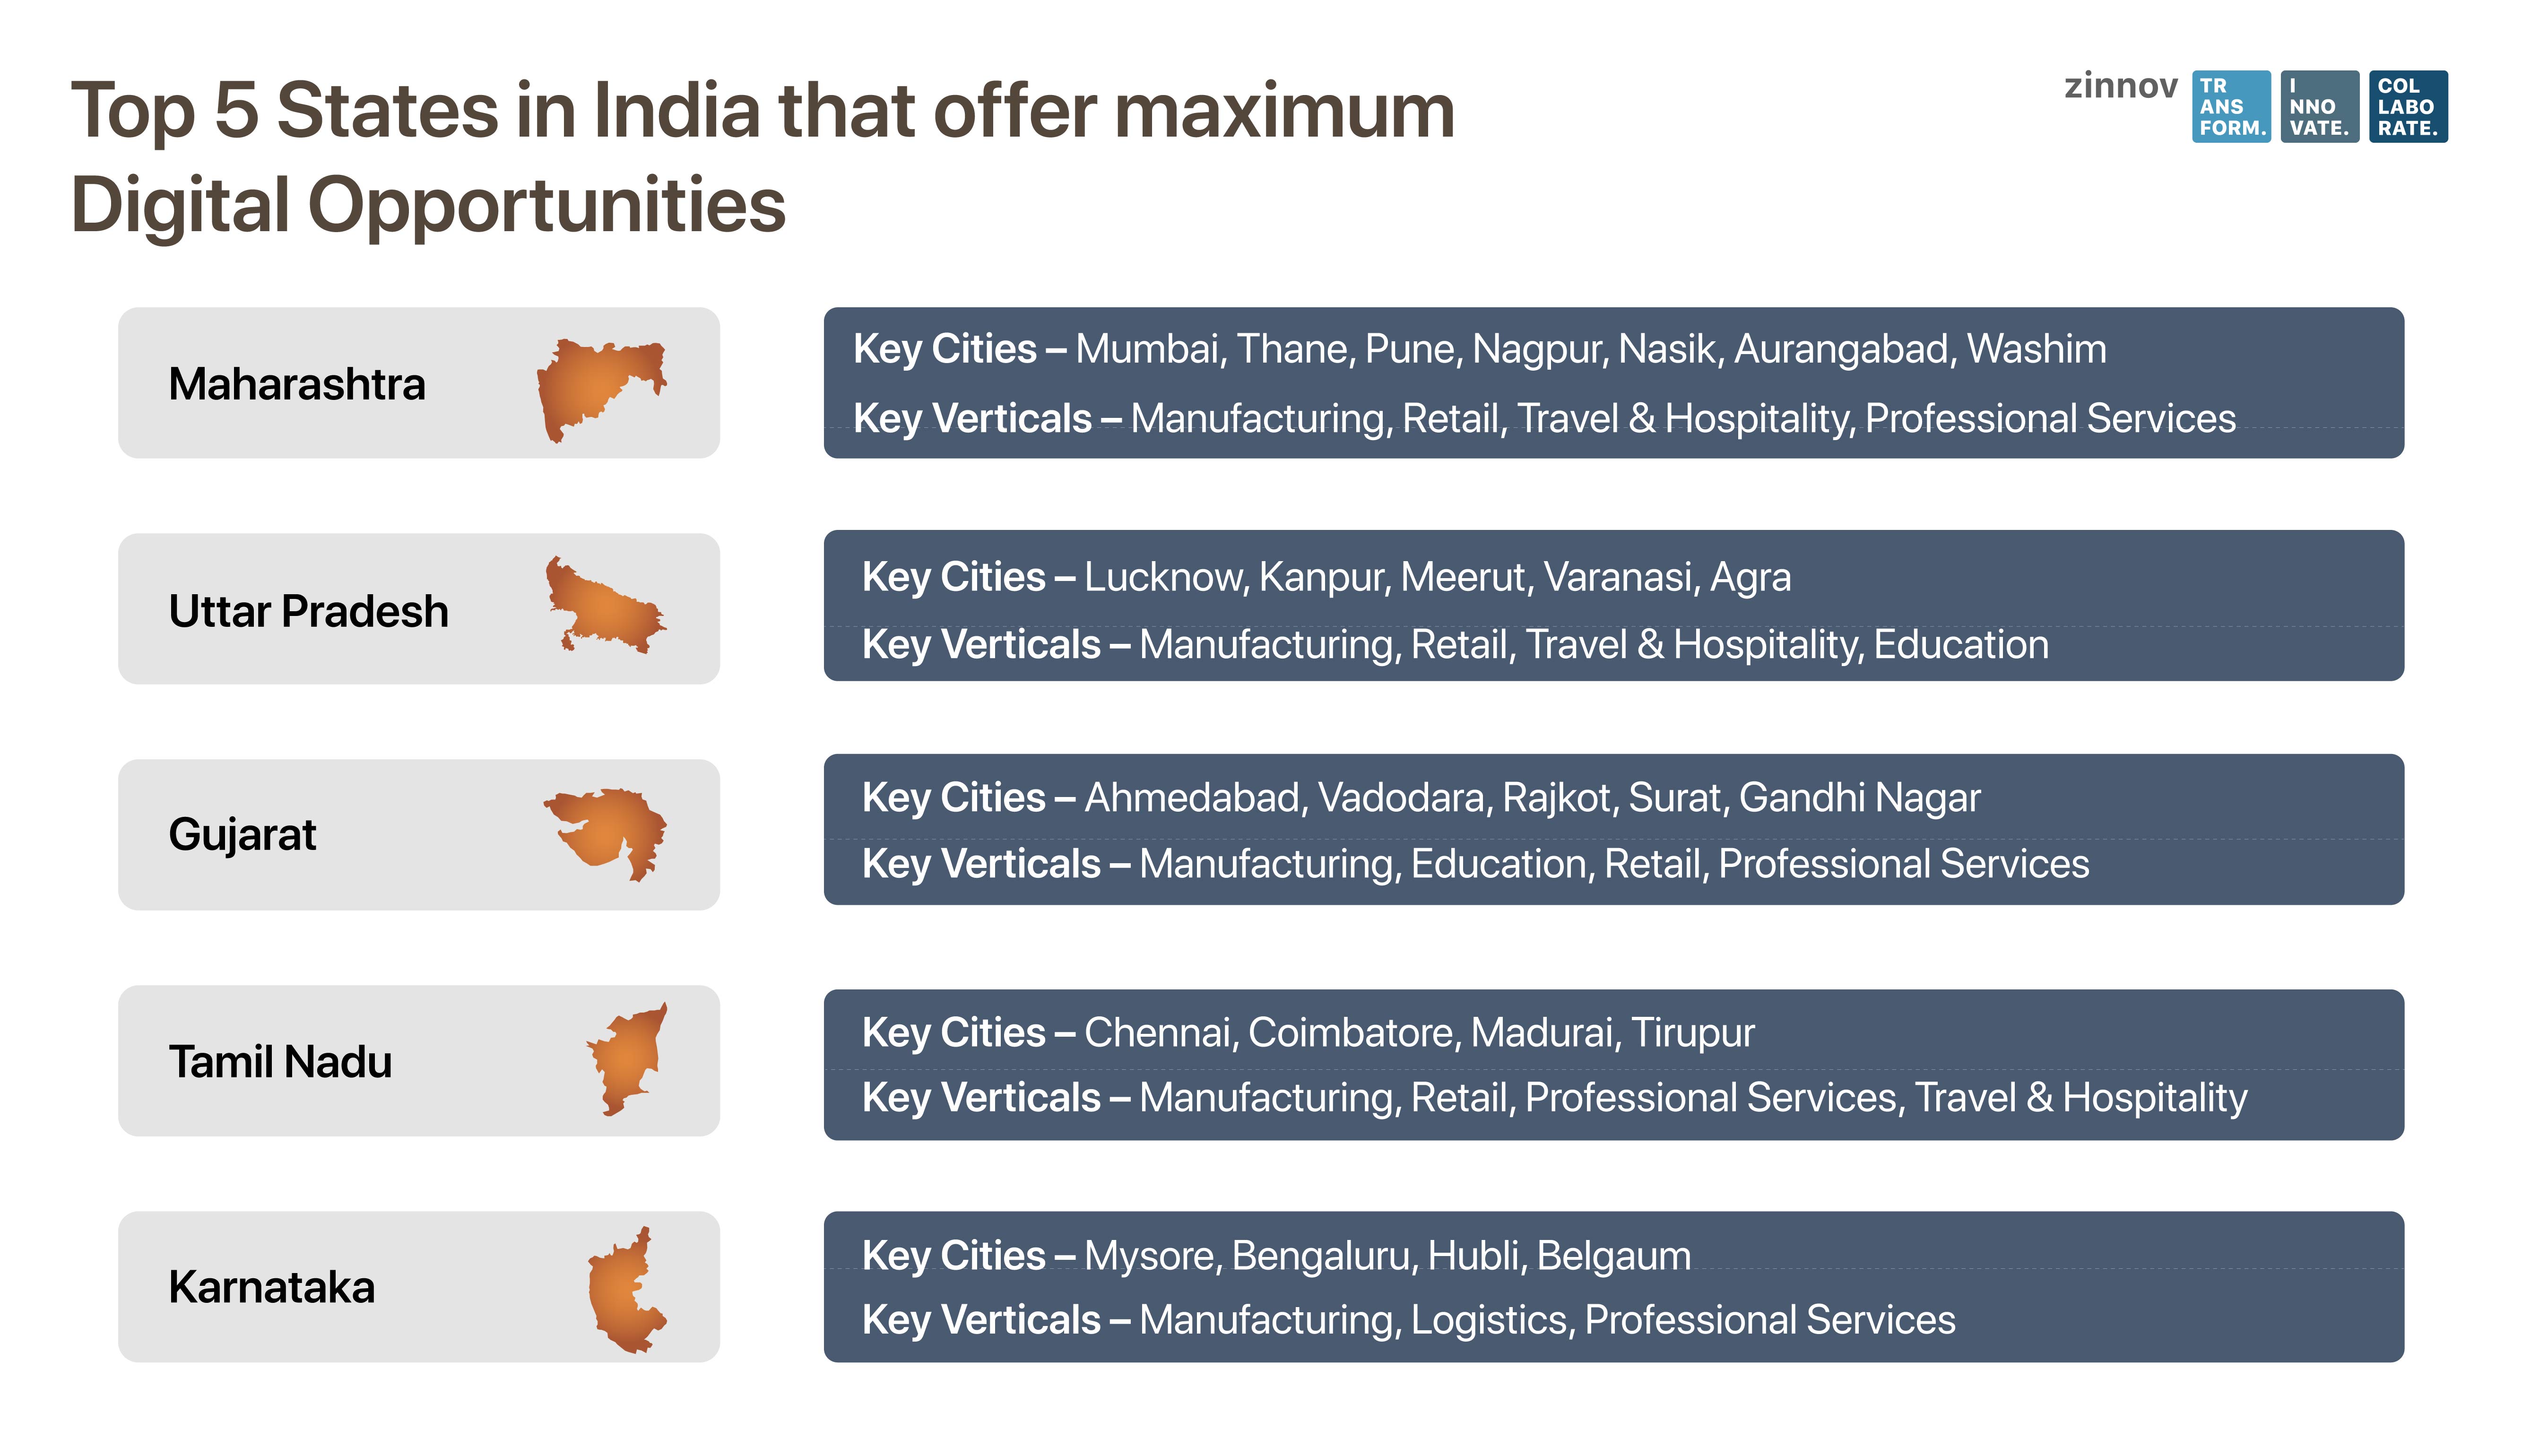 Top 5 states those offer maximum digital opportunity in India